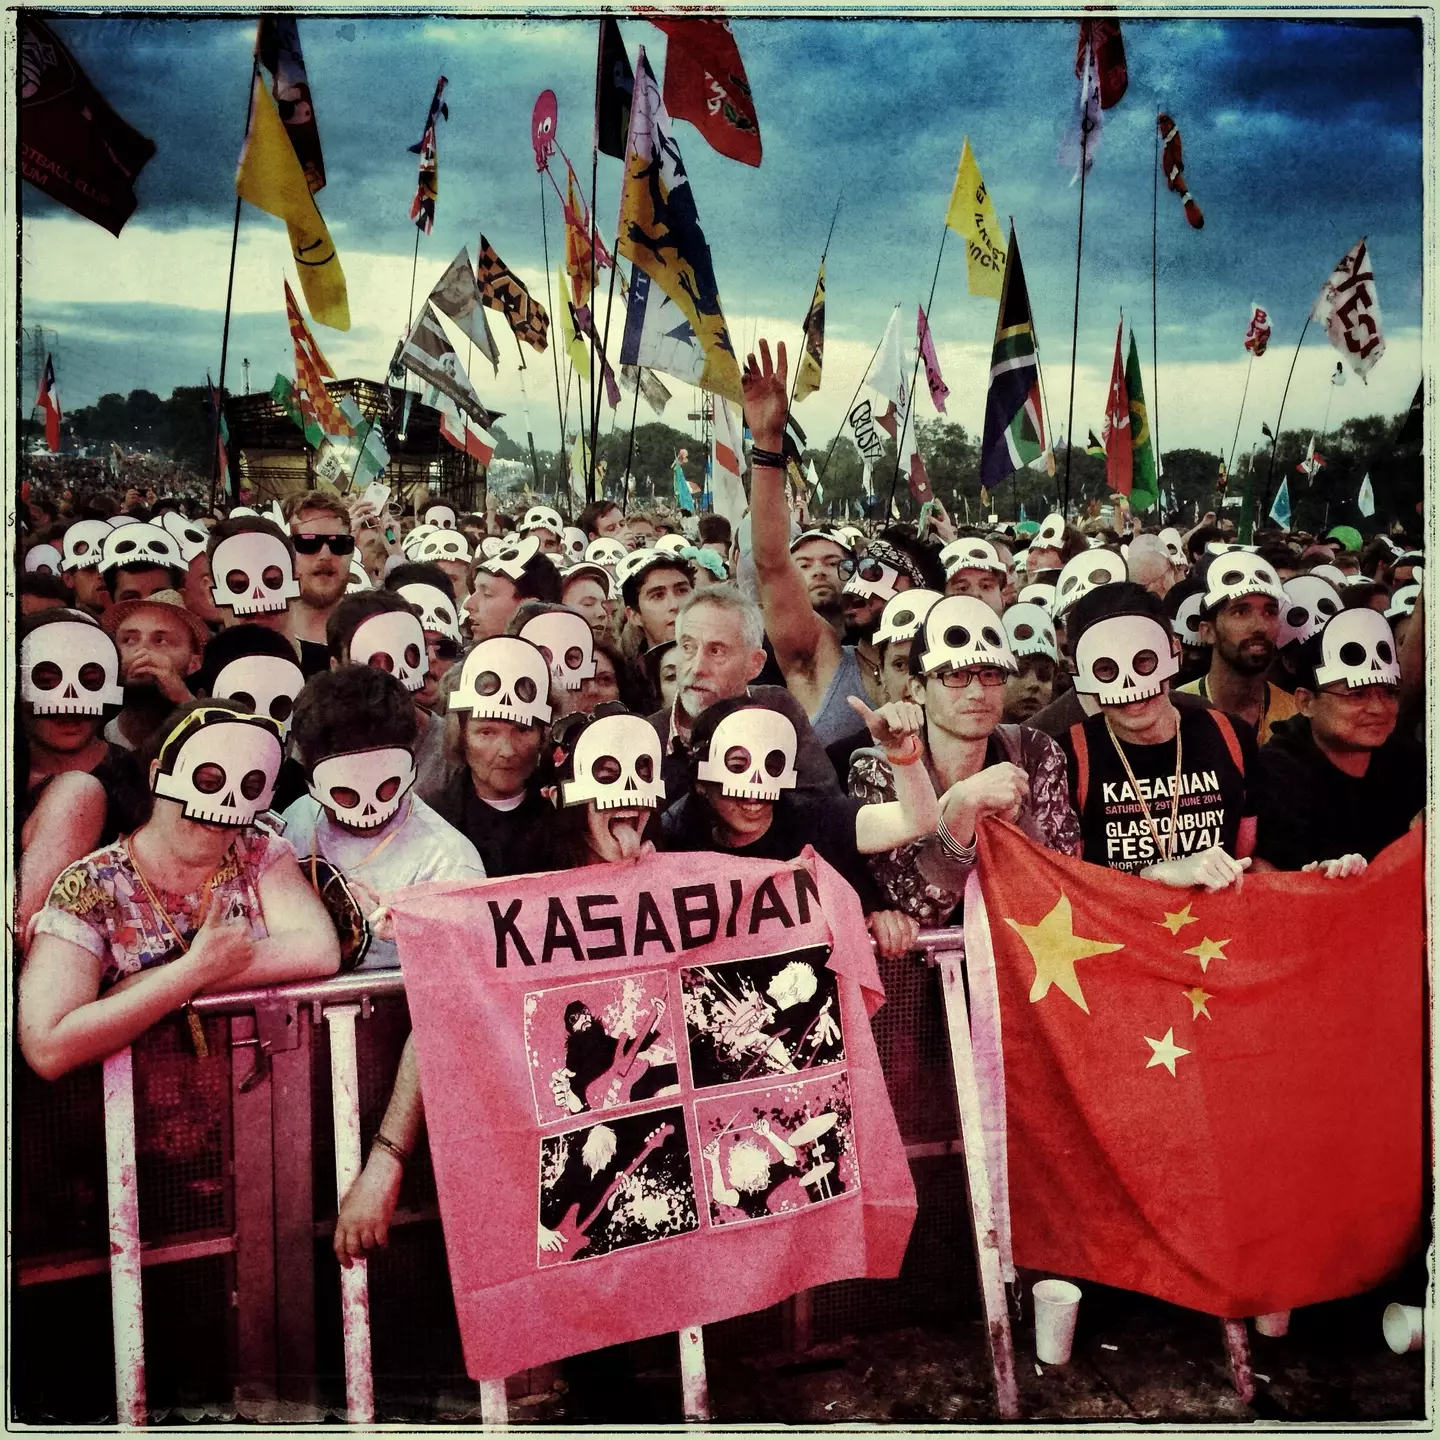 Kasabian fans at Glastonbury back in 2014. (Jim Dyson/Getty Images)